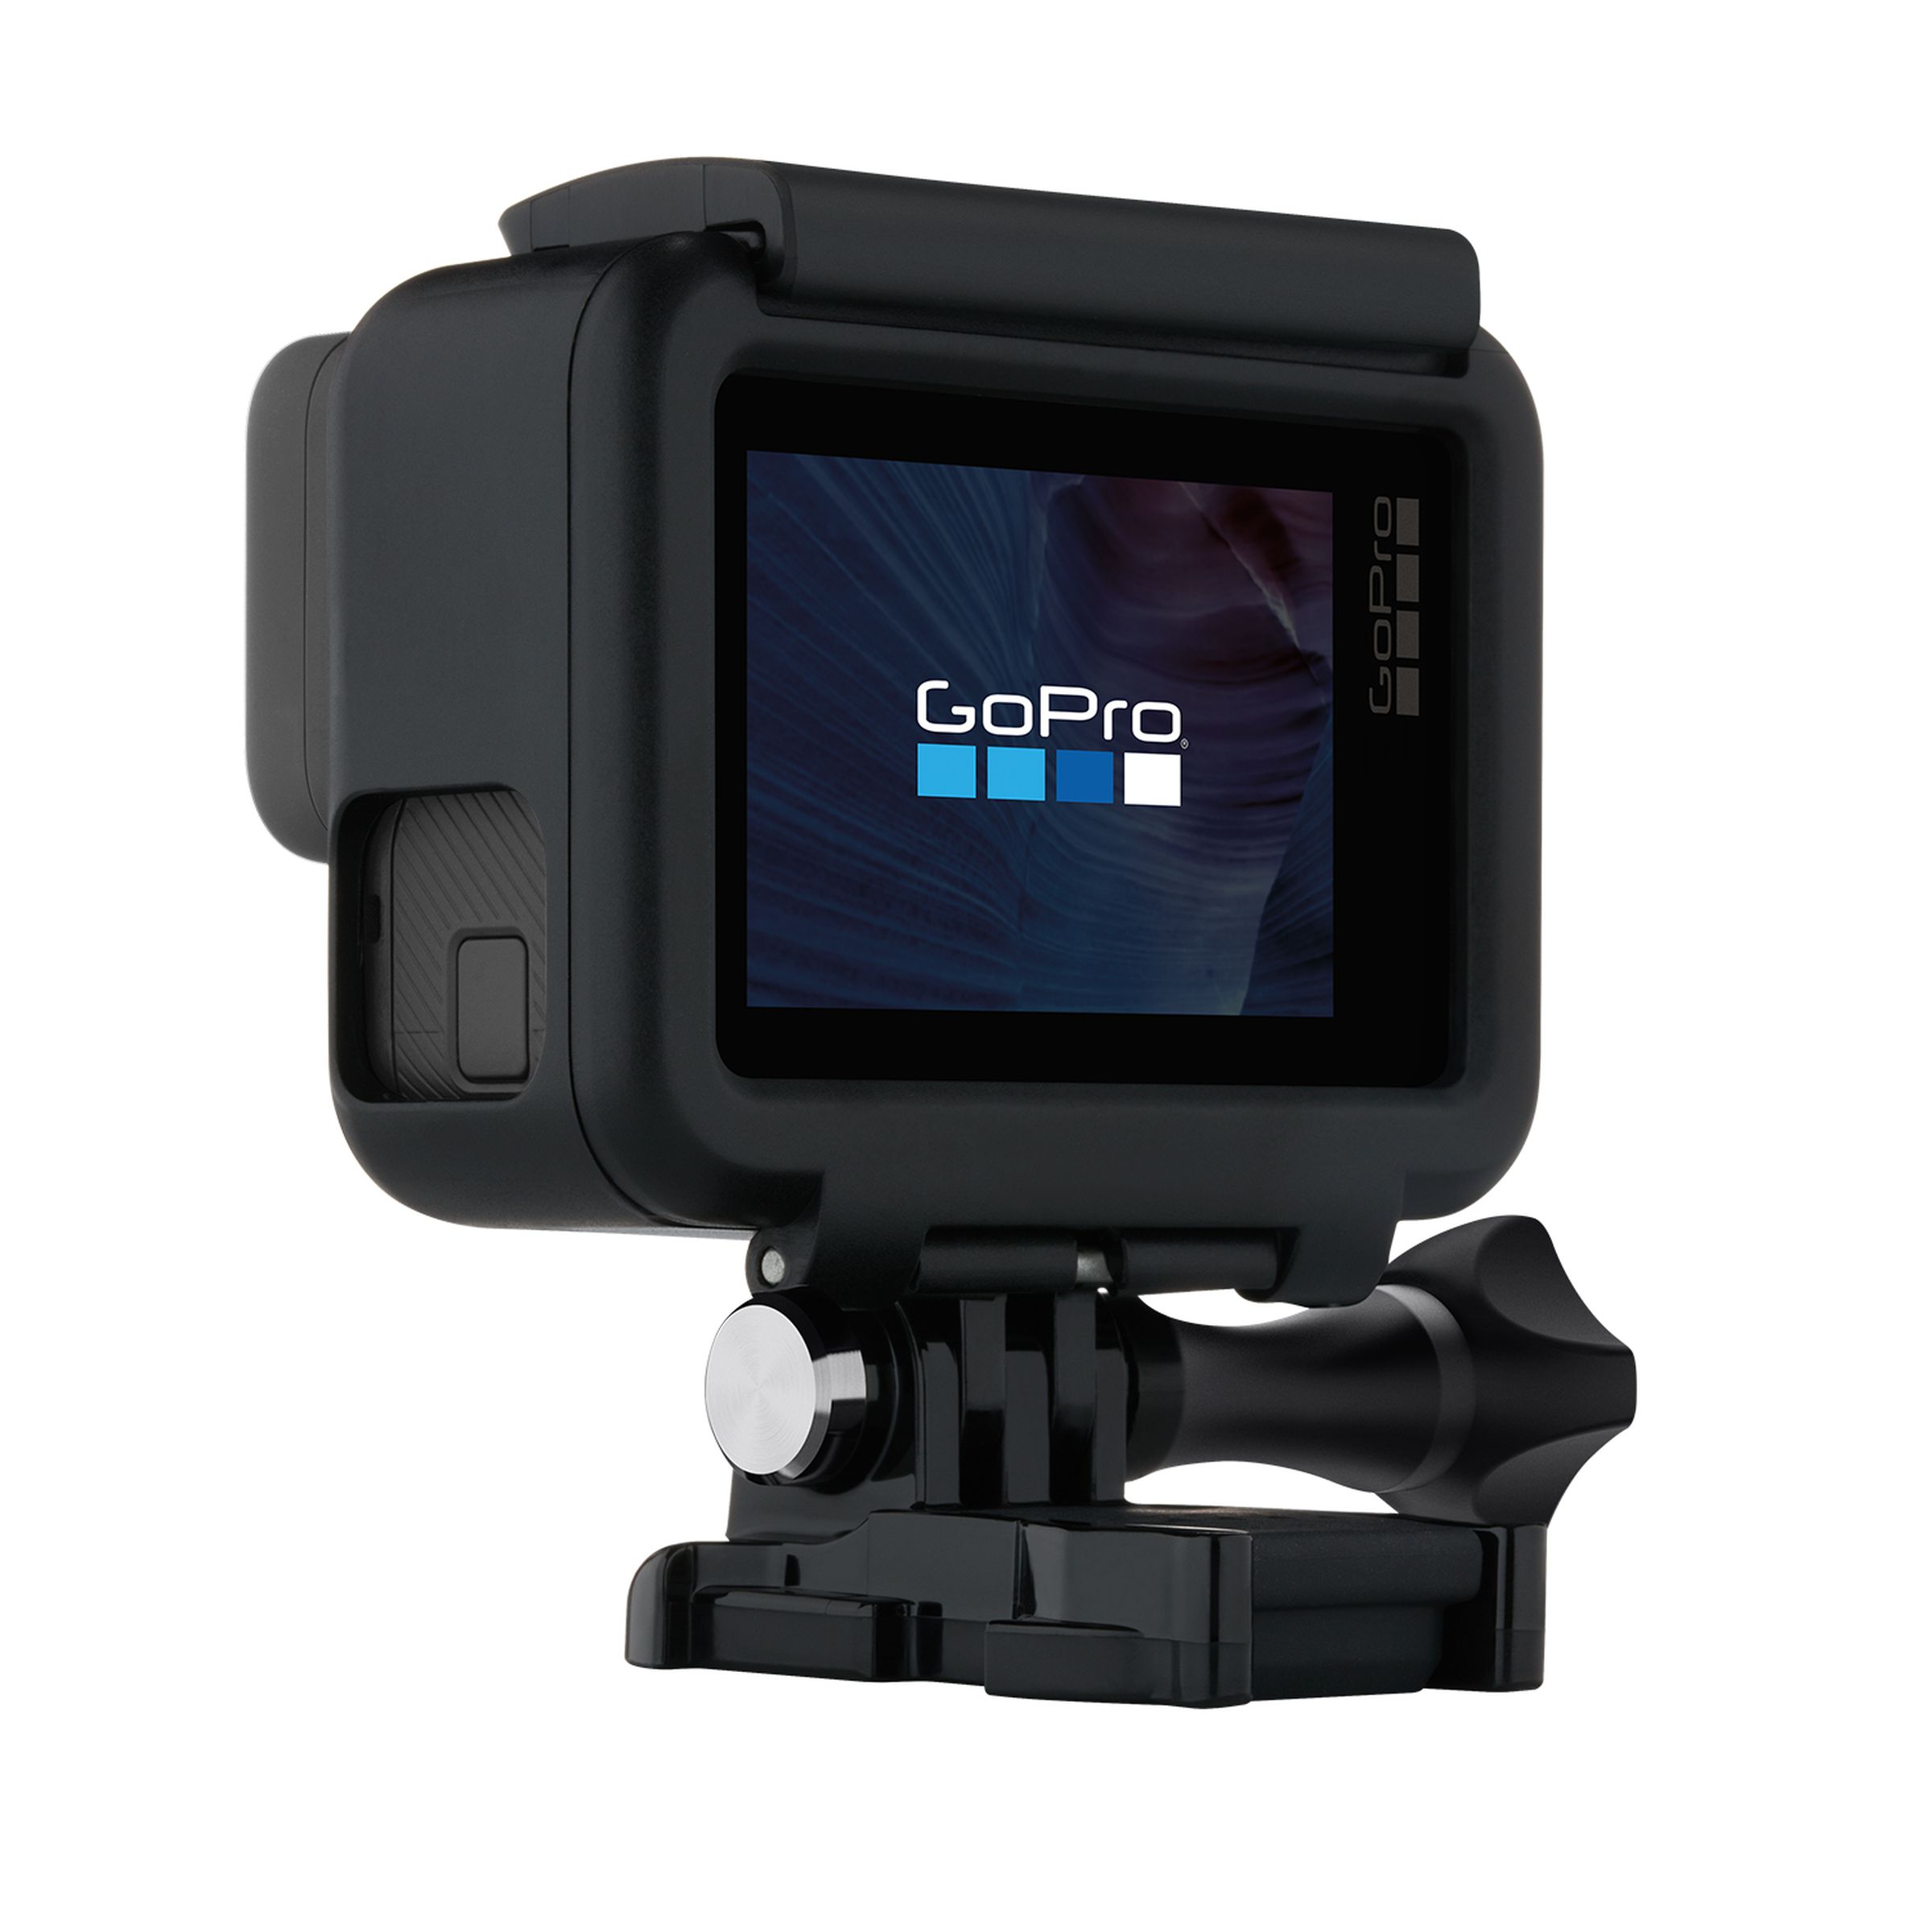 GoPro Hero 5 Black and Hero 5 Session in photos